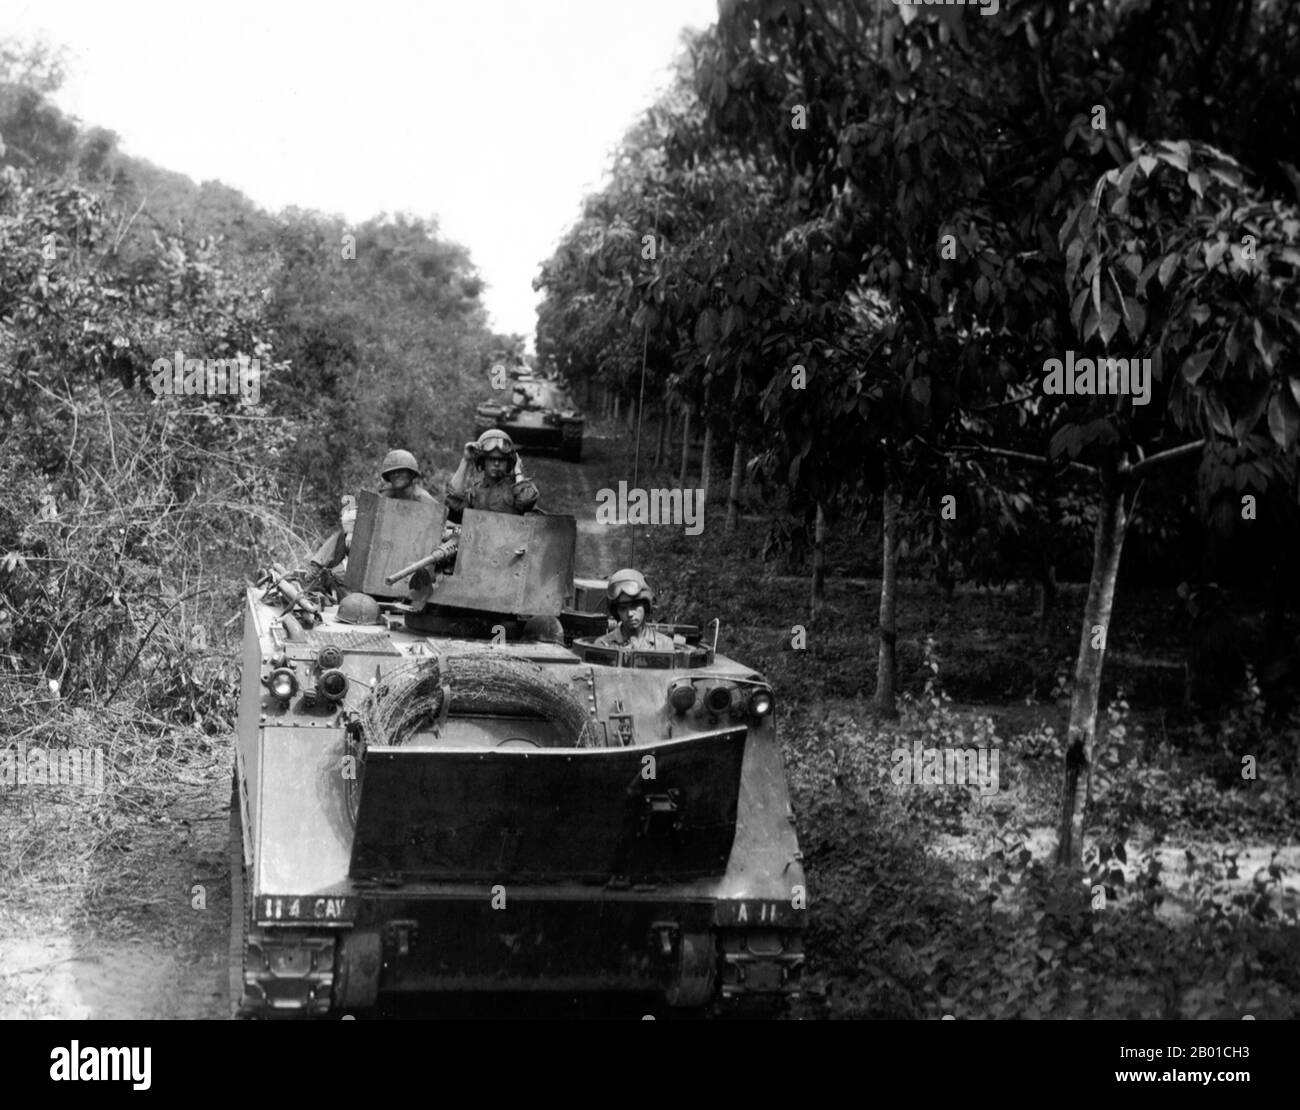 Vietnam: US Army M113 armoured personnel carriers and M4SA3 tanks deploy between jungle and a rubber plantation in the 'Iron Triangle' north of Saigon, Operation Cedar Falls, January 1967.  The Second Indochina War, known in America as the Vietnam War, was a Cold War era military conflict that occurred in Vietnam, Laos, and Cambodia from 1 November 1955 to the fall of Saigon on 30 April 1975. This war followed the First Indochina War and was fought between North Vietnam, supported by its communist allies, and the government of South Vietnam, supported by the U.S. Stock Photo